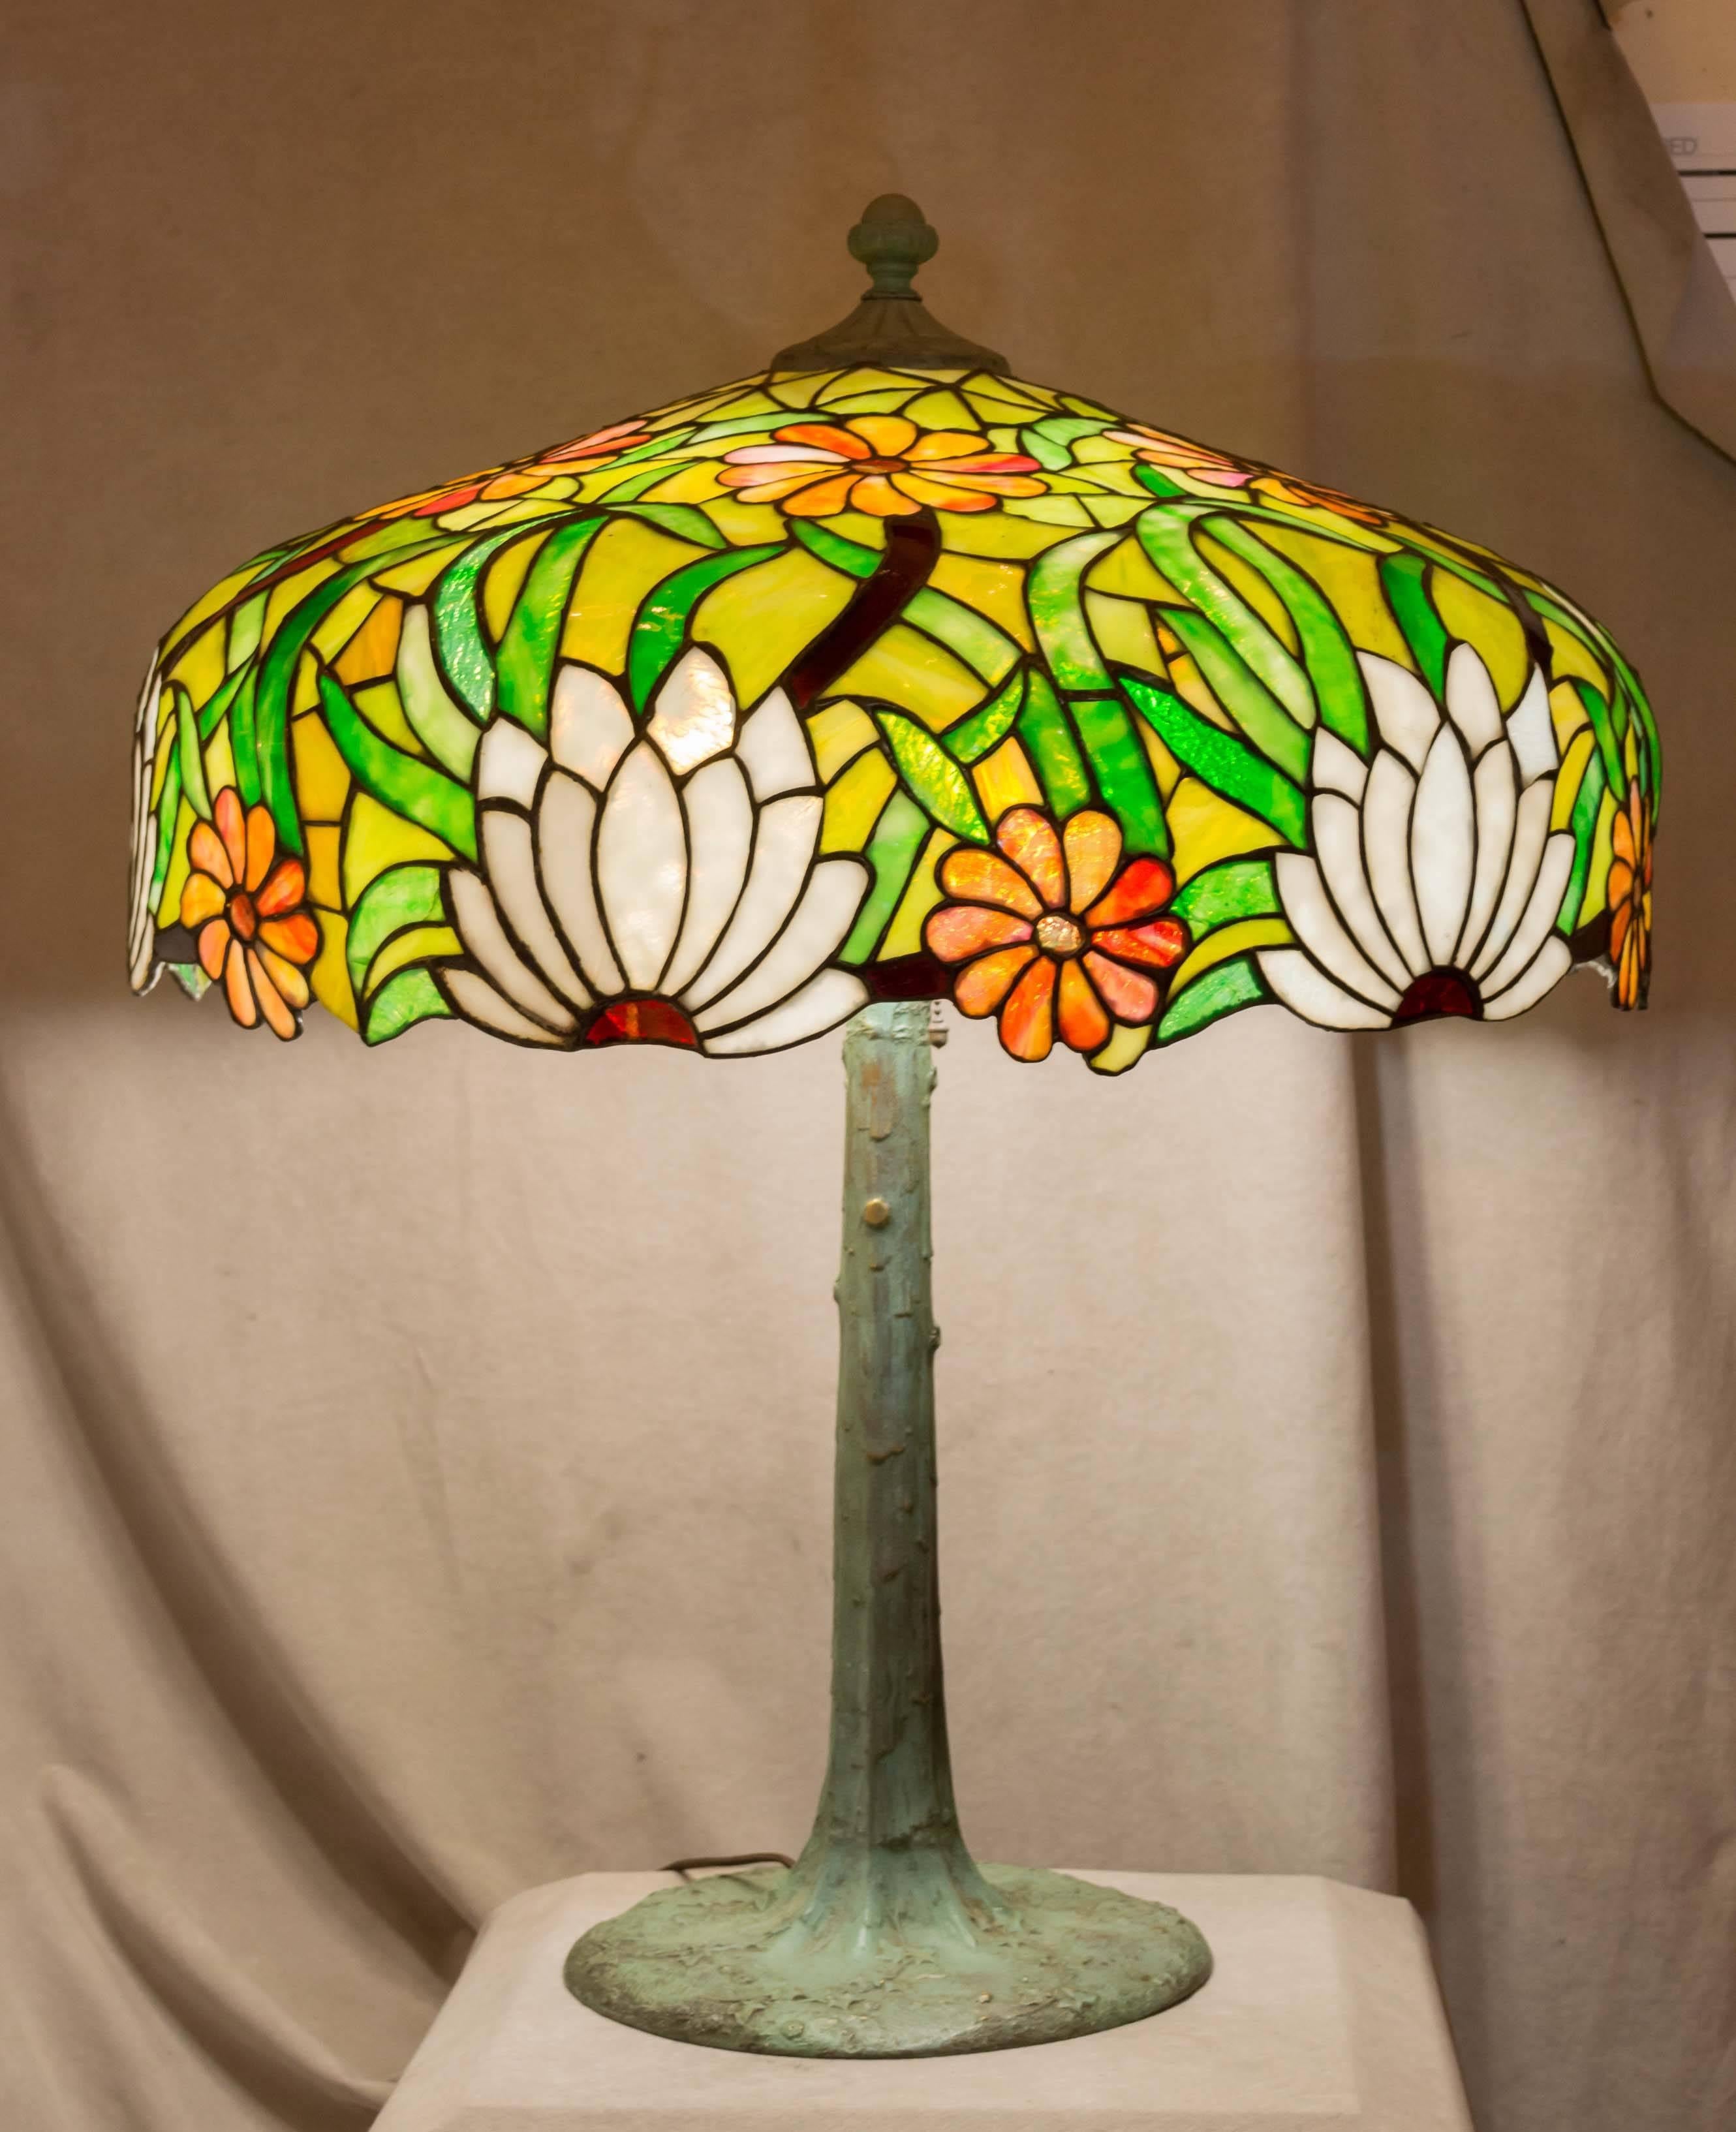 This very large and colorful table lamp is guaranteed to be a period piece of lighting. The base is bronze and has the unusual feature of five sockets. It is signed under the base plate, 